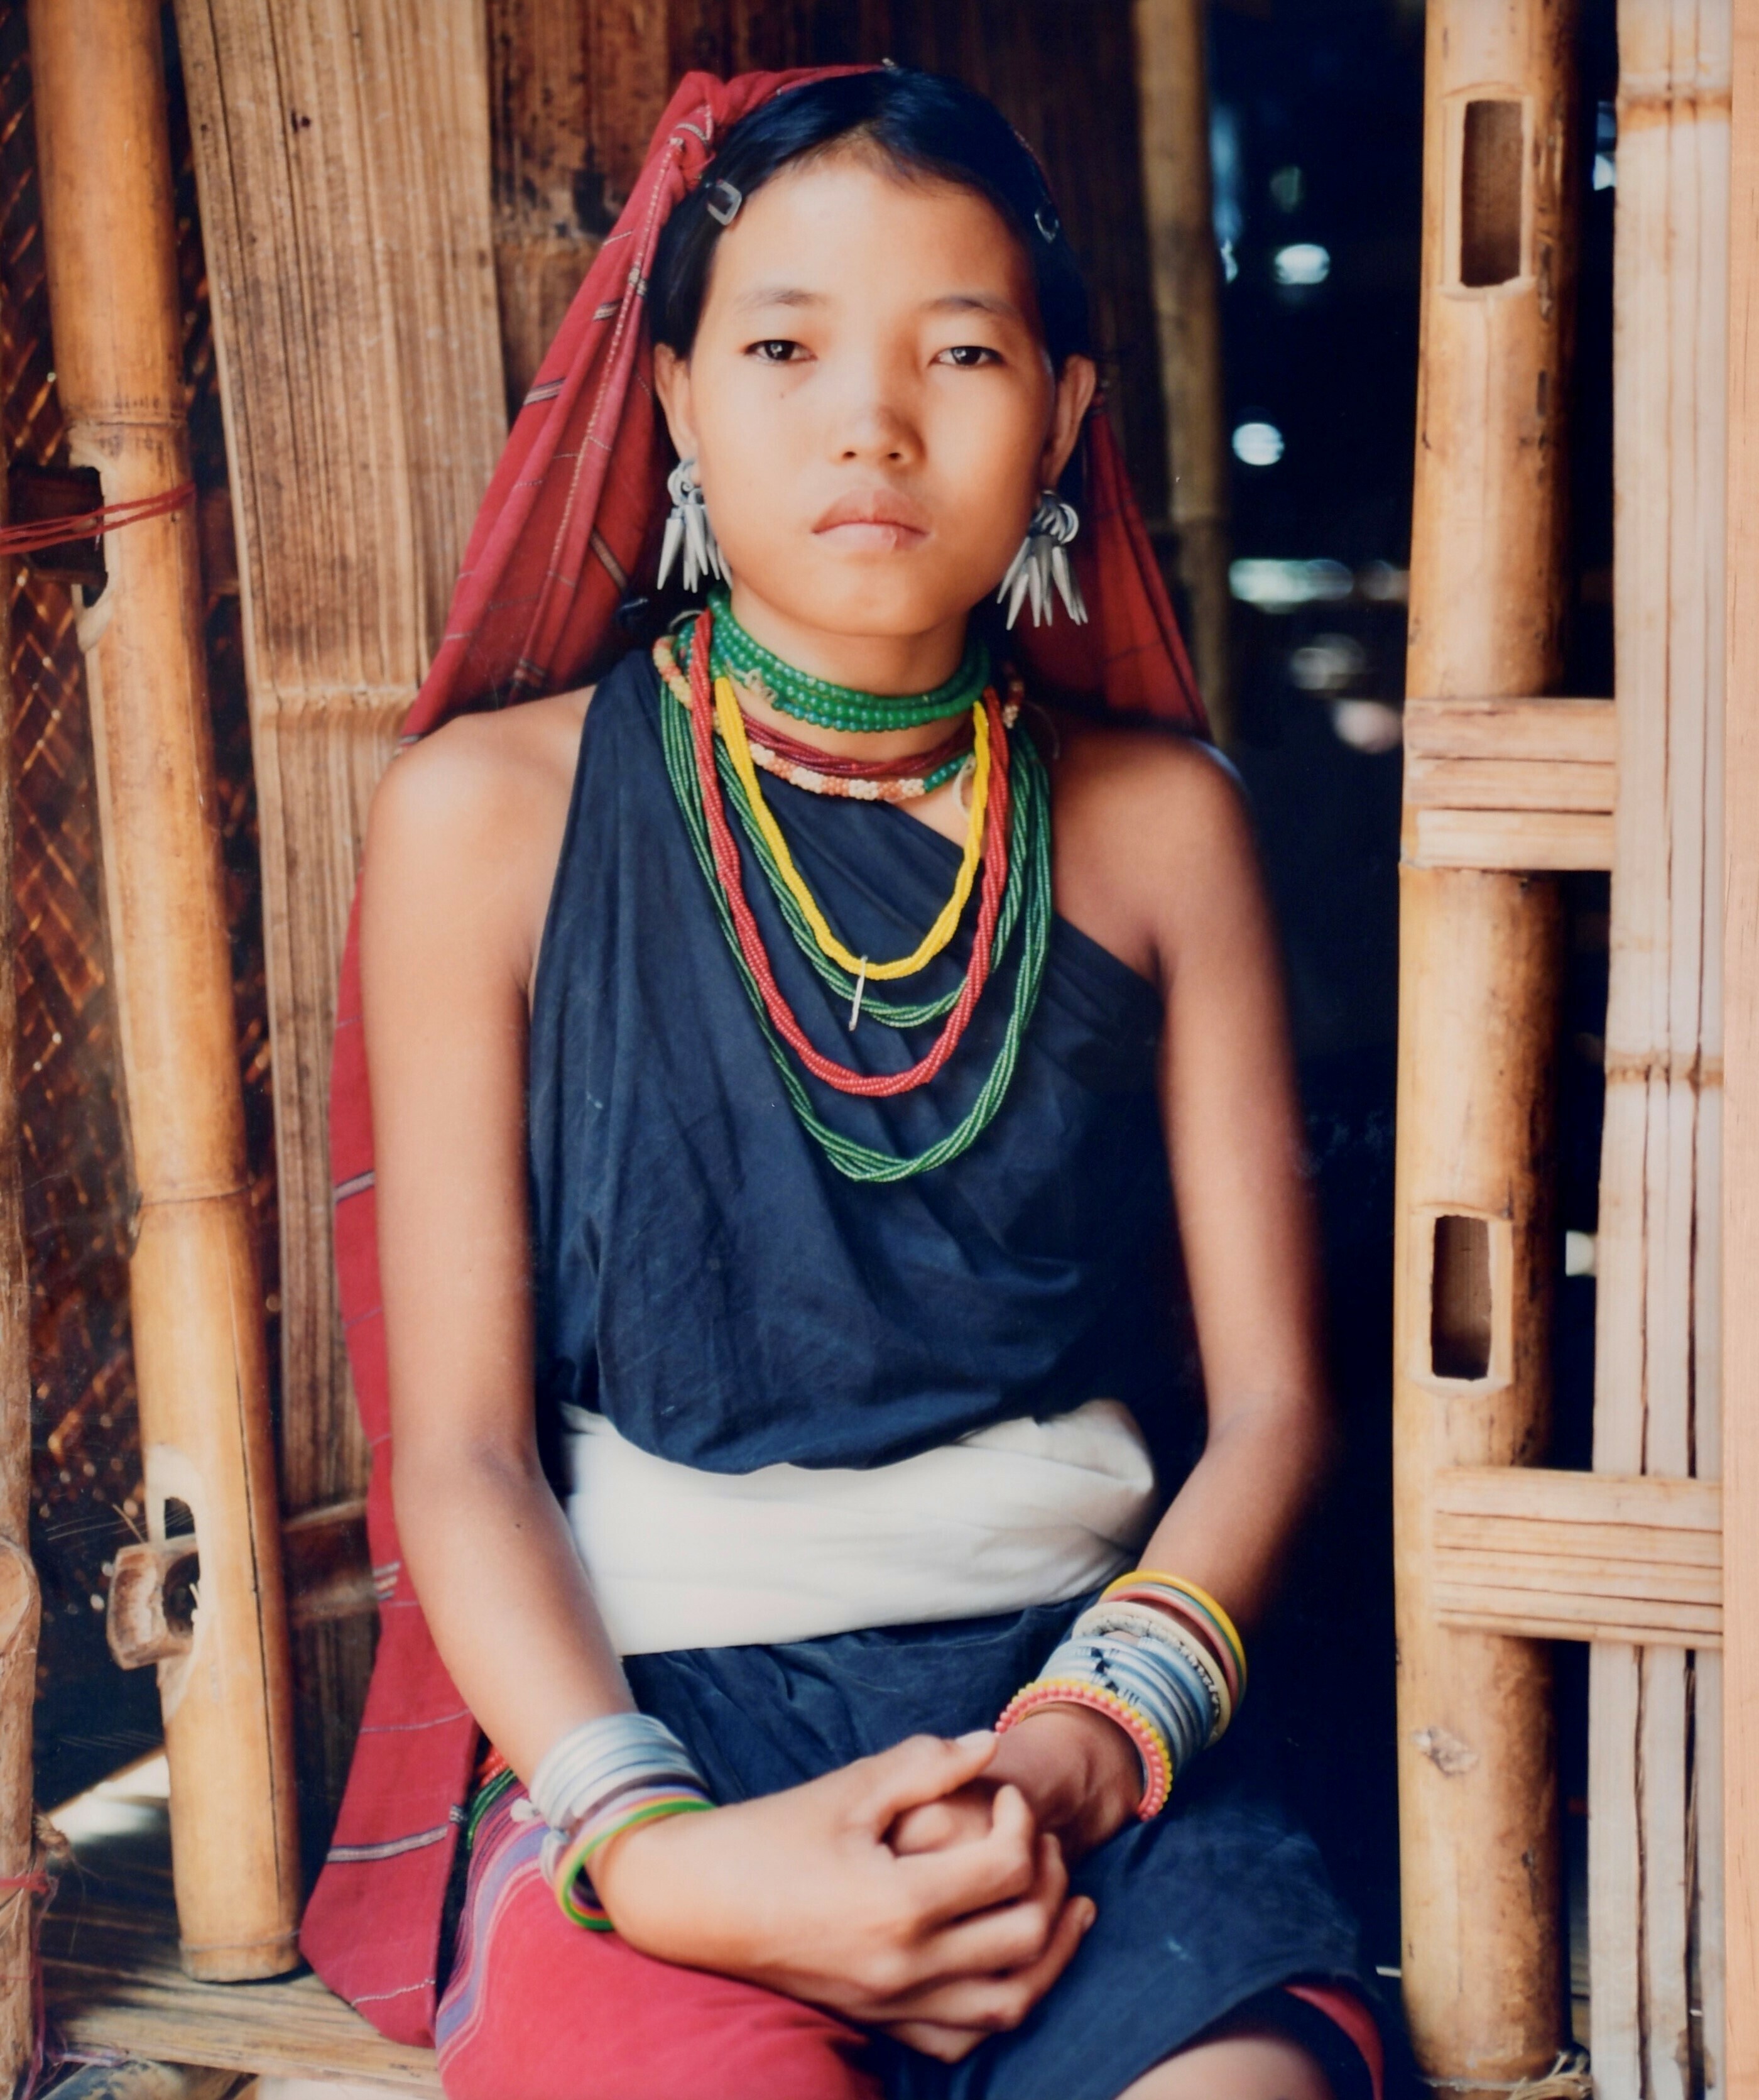 Chan Chao, "Karenni GIrl," 1997, Chromogenic print, Frame Dimension: 39 x 25 in. (99.1 x 63.5 cm), In memory of the Honorable John Normandy Reynolds and his wife Ann McMenamin Reynolds, 2021.29.8